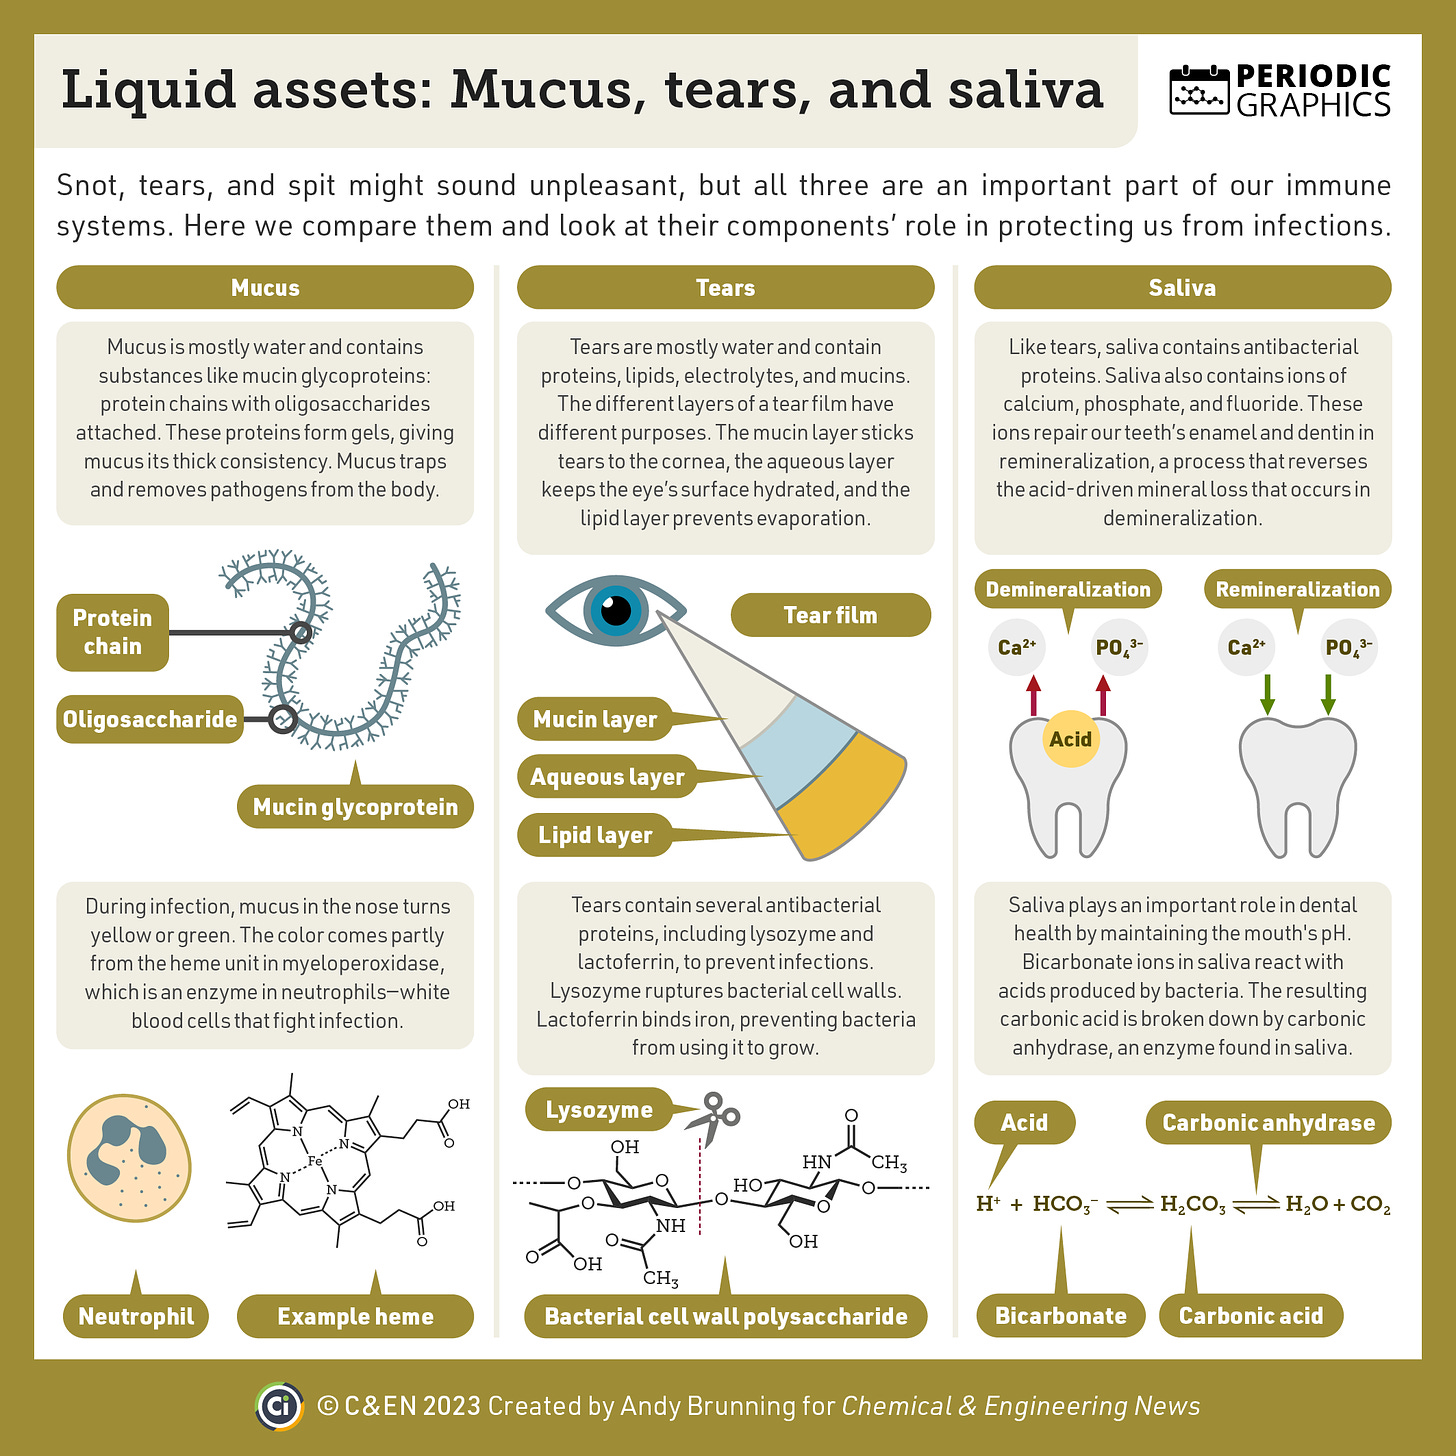 An infographic describes the chemistry of mucus, tears, and saliva. The leftmost third describes the components of mucus, the middle third describes the components of tears, and the rightmost third describes the components of saliva.